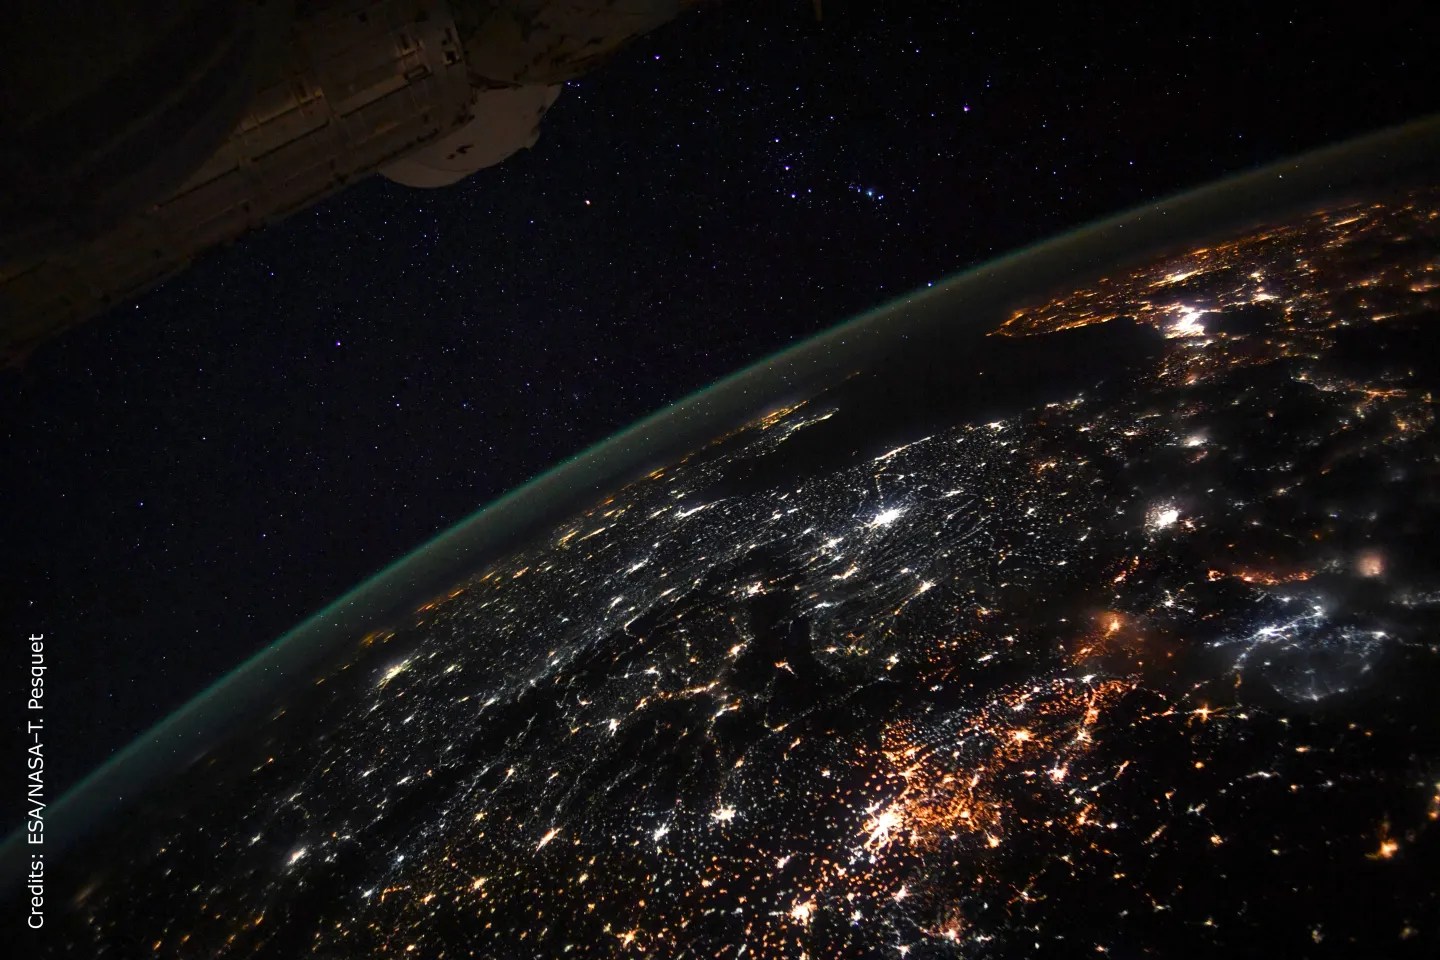 Hearth photo by night taken from space